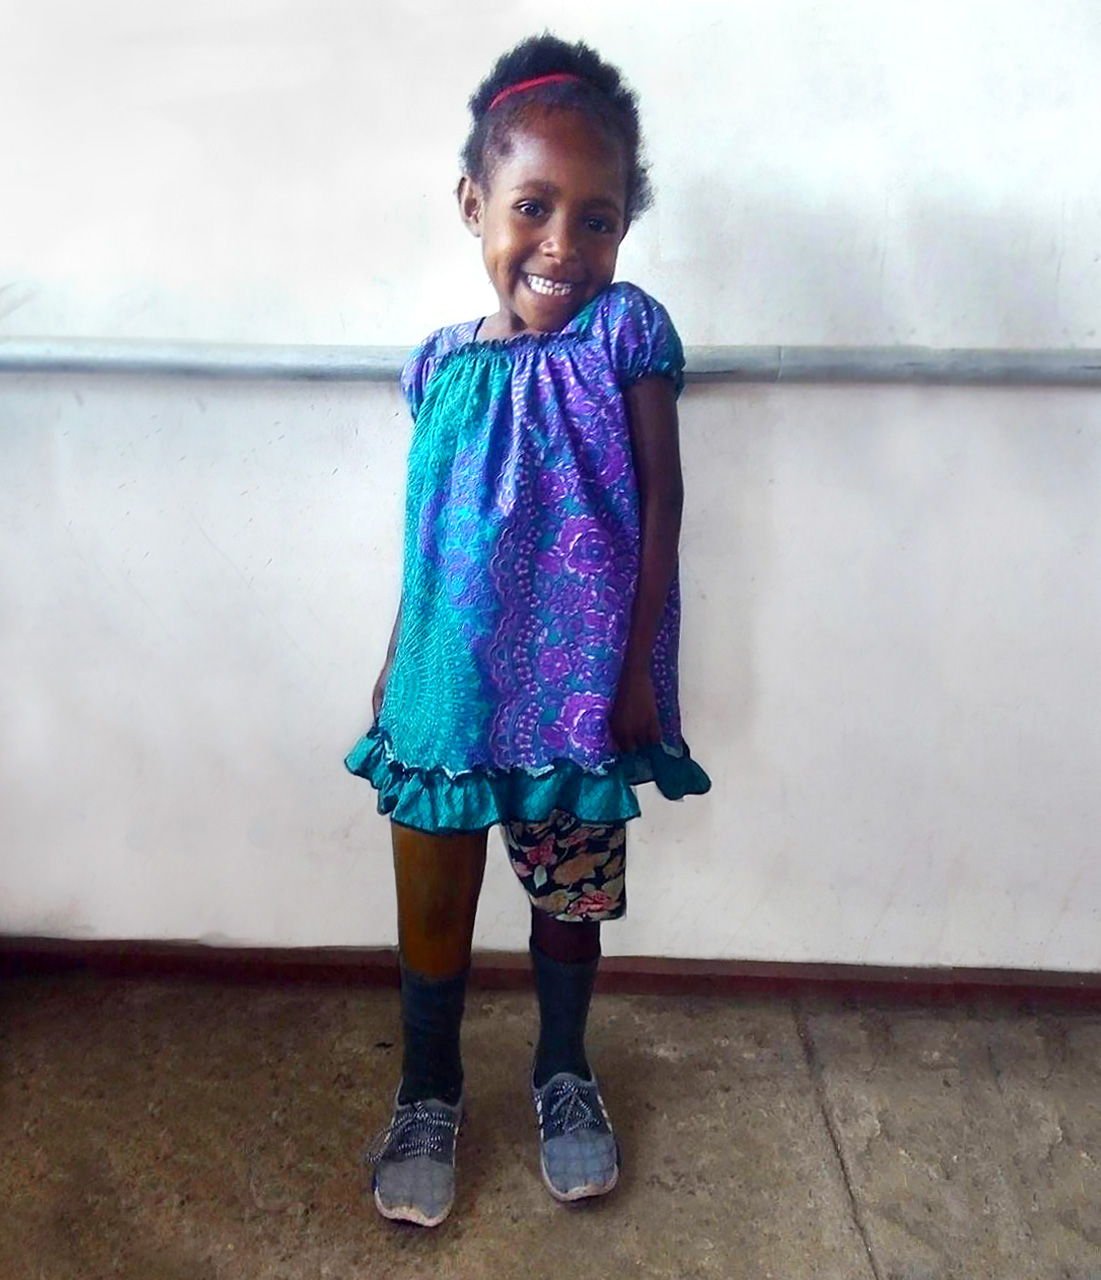 Violet standing proudly with her new prosthesis, beaming at the camera.